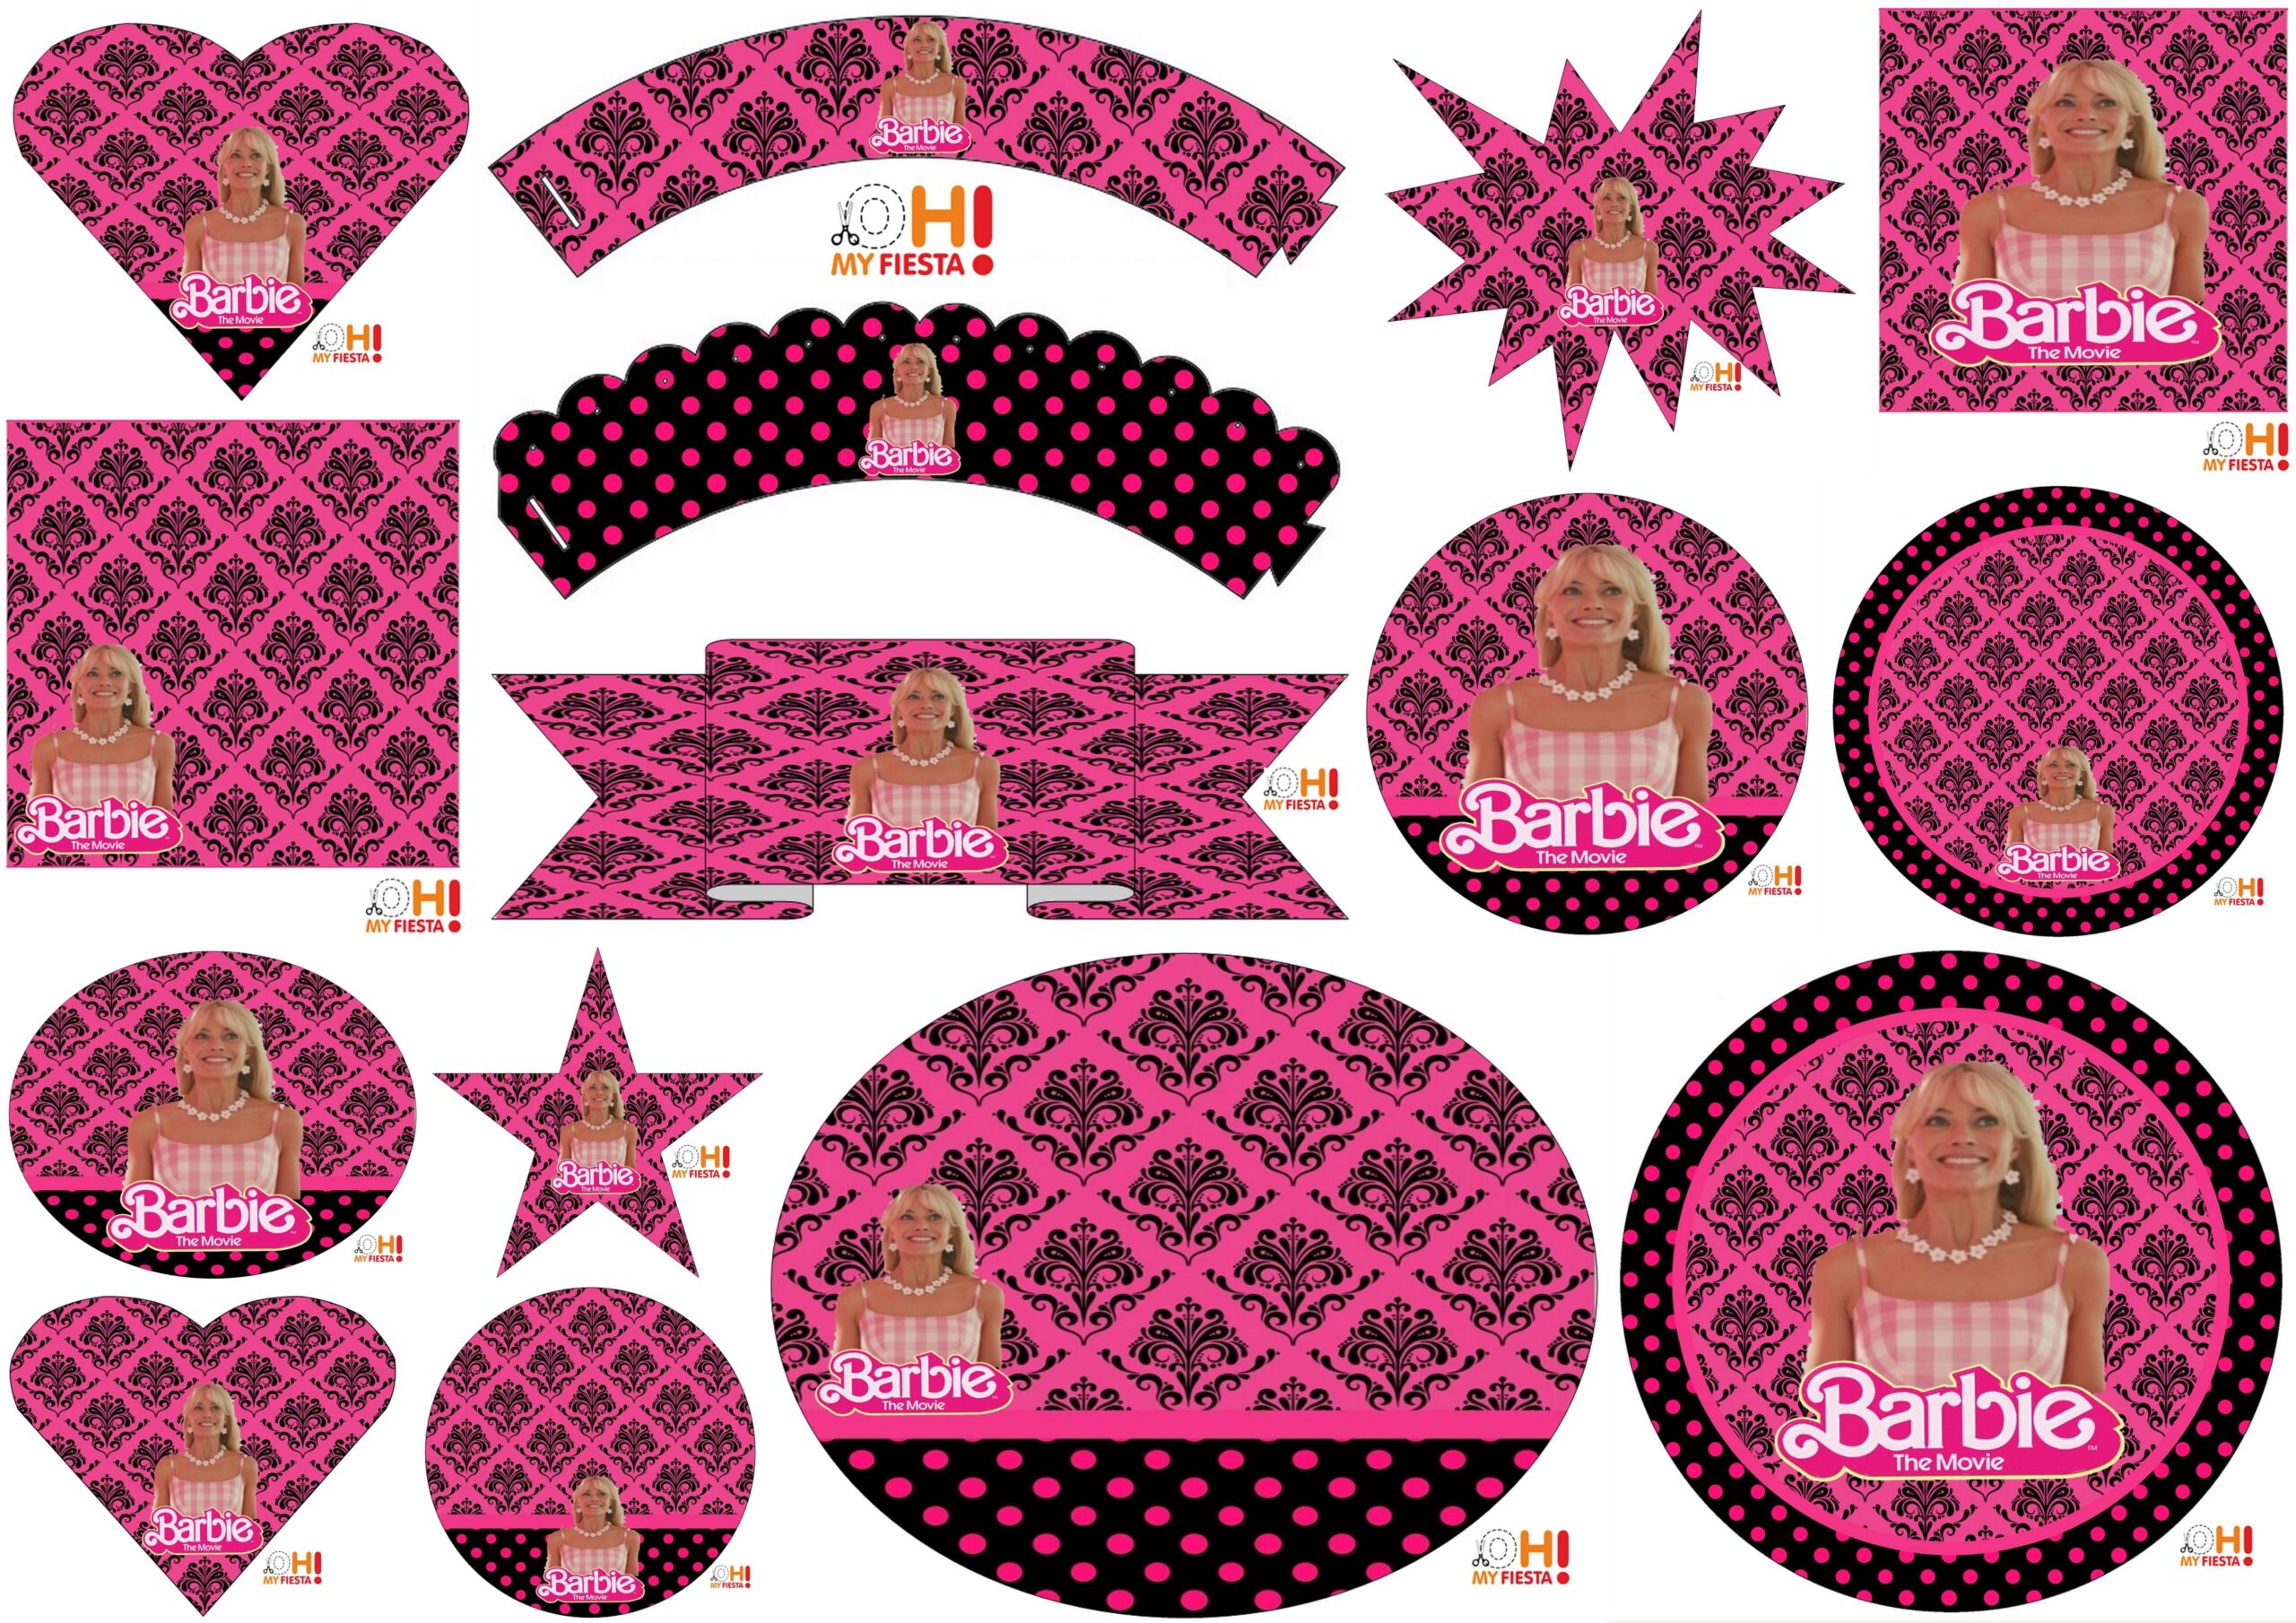 Barbie The Movie Free Printable Cupcake Wrappers And Toppers Oh My Fiesta In English